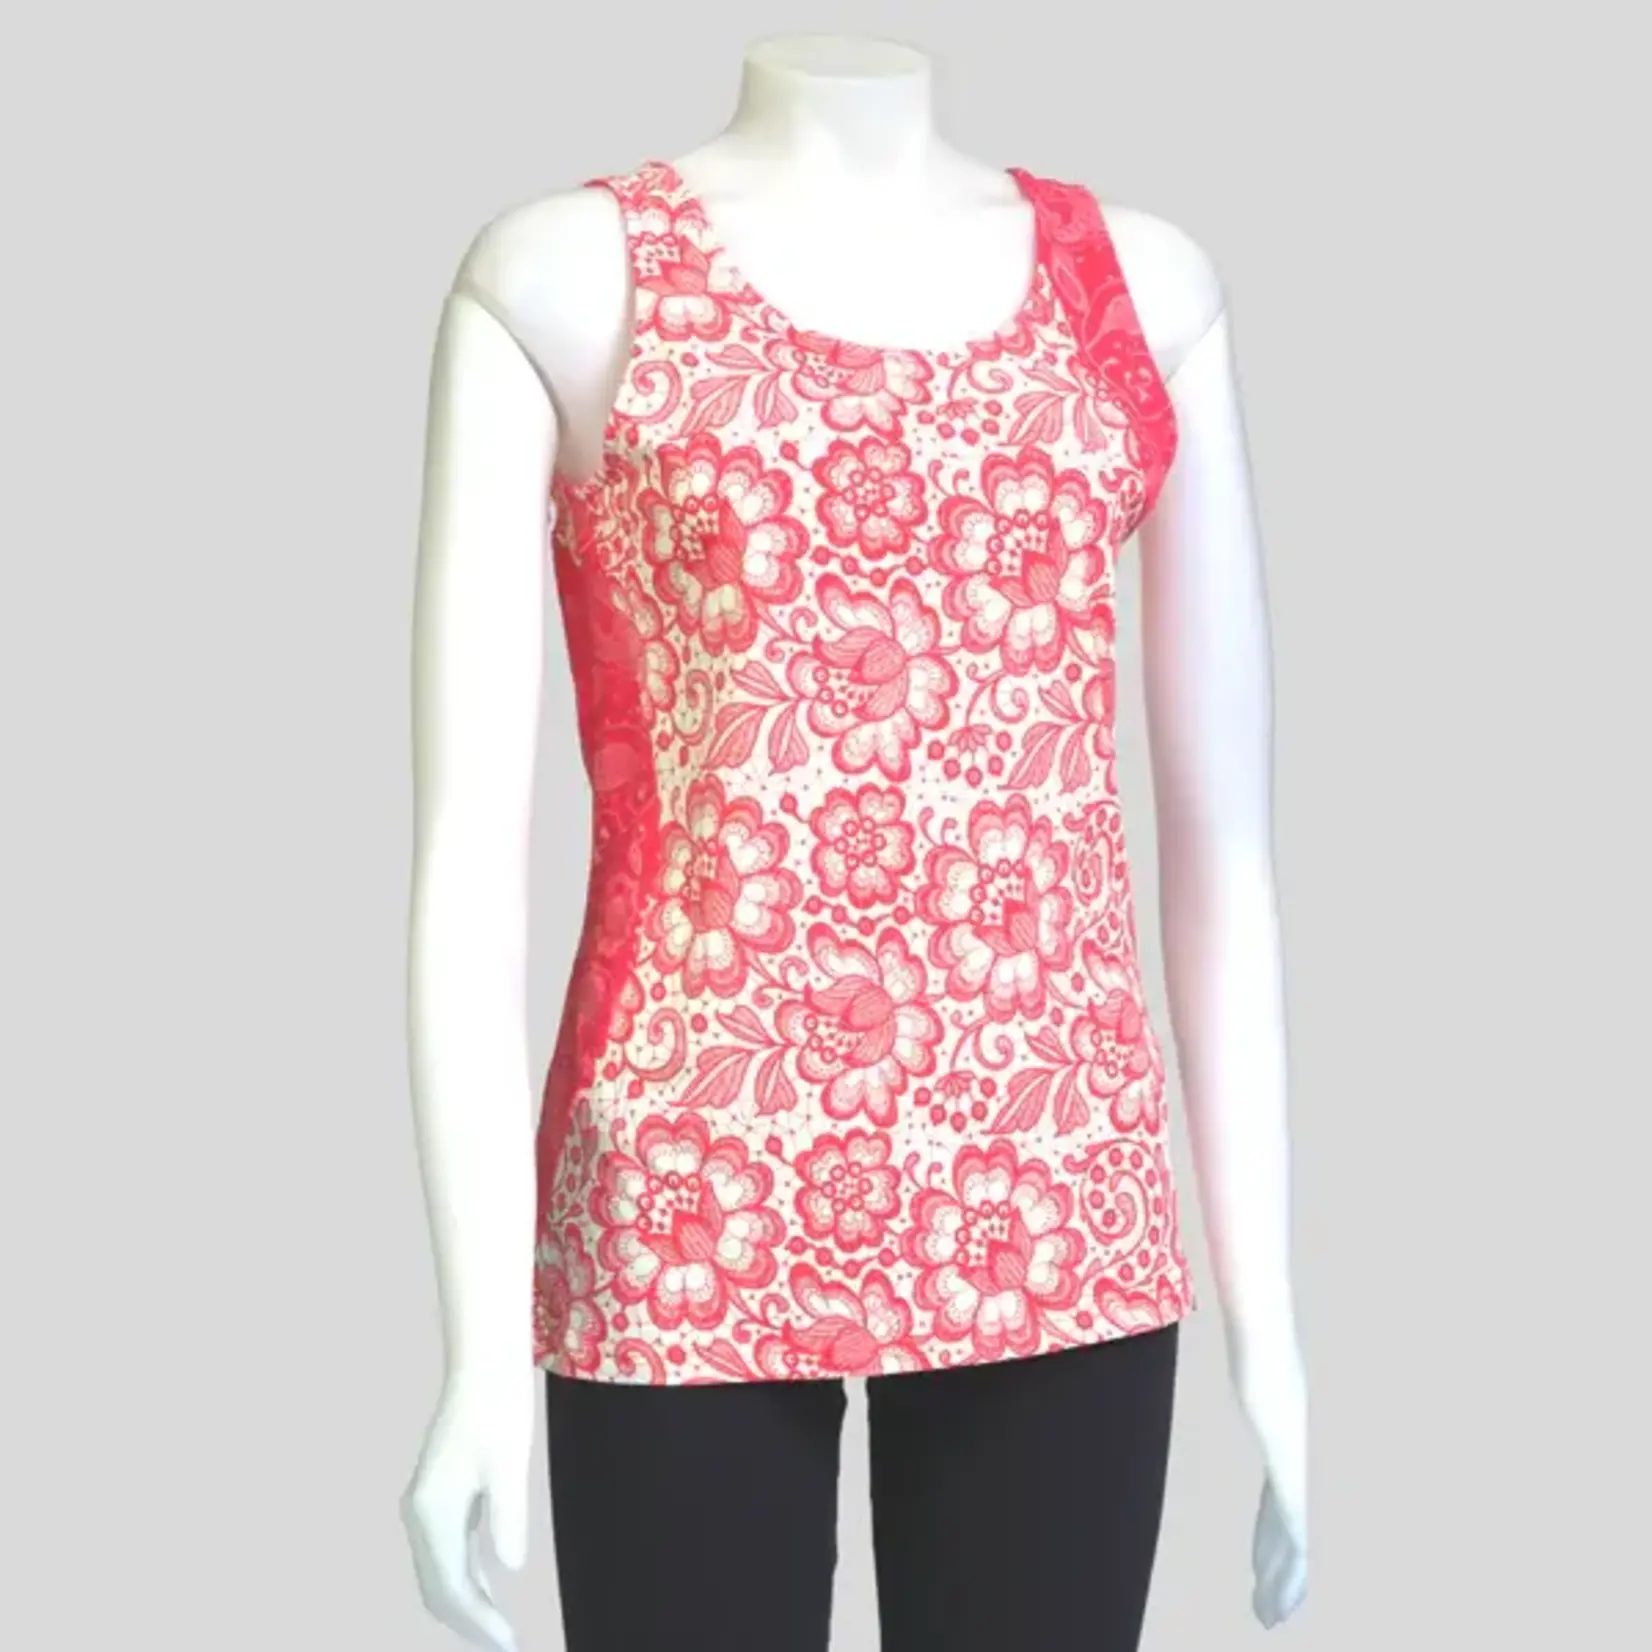 LEOPARDS AND ROSES Sinker Tank T23010 Organic Cotton